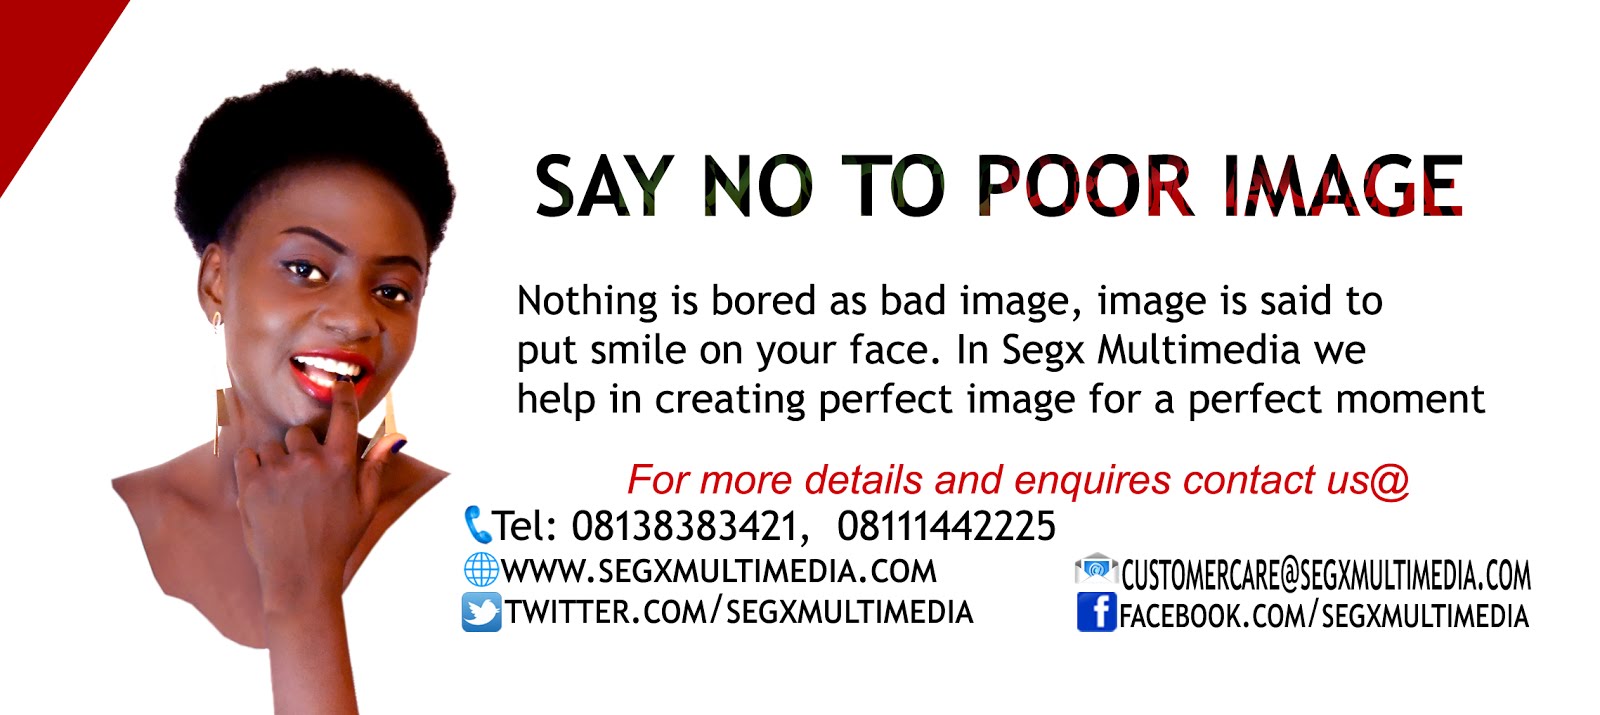 SAY NO TO POOR IMAGE